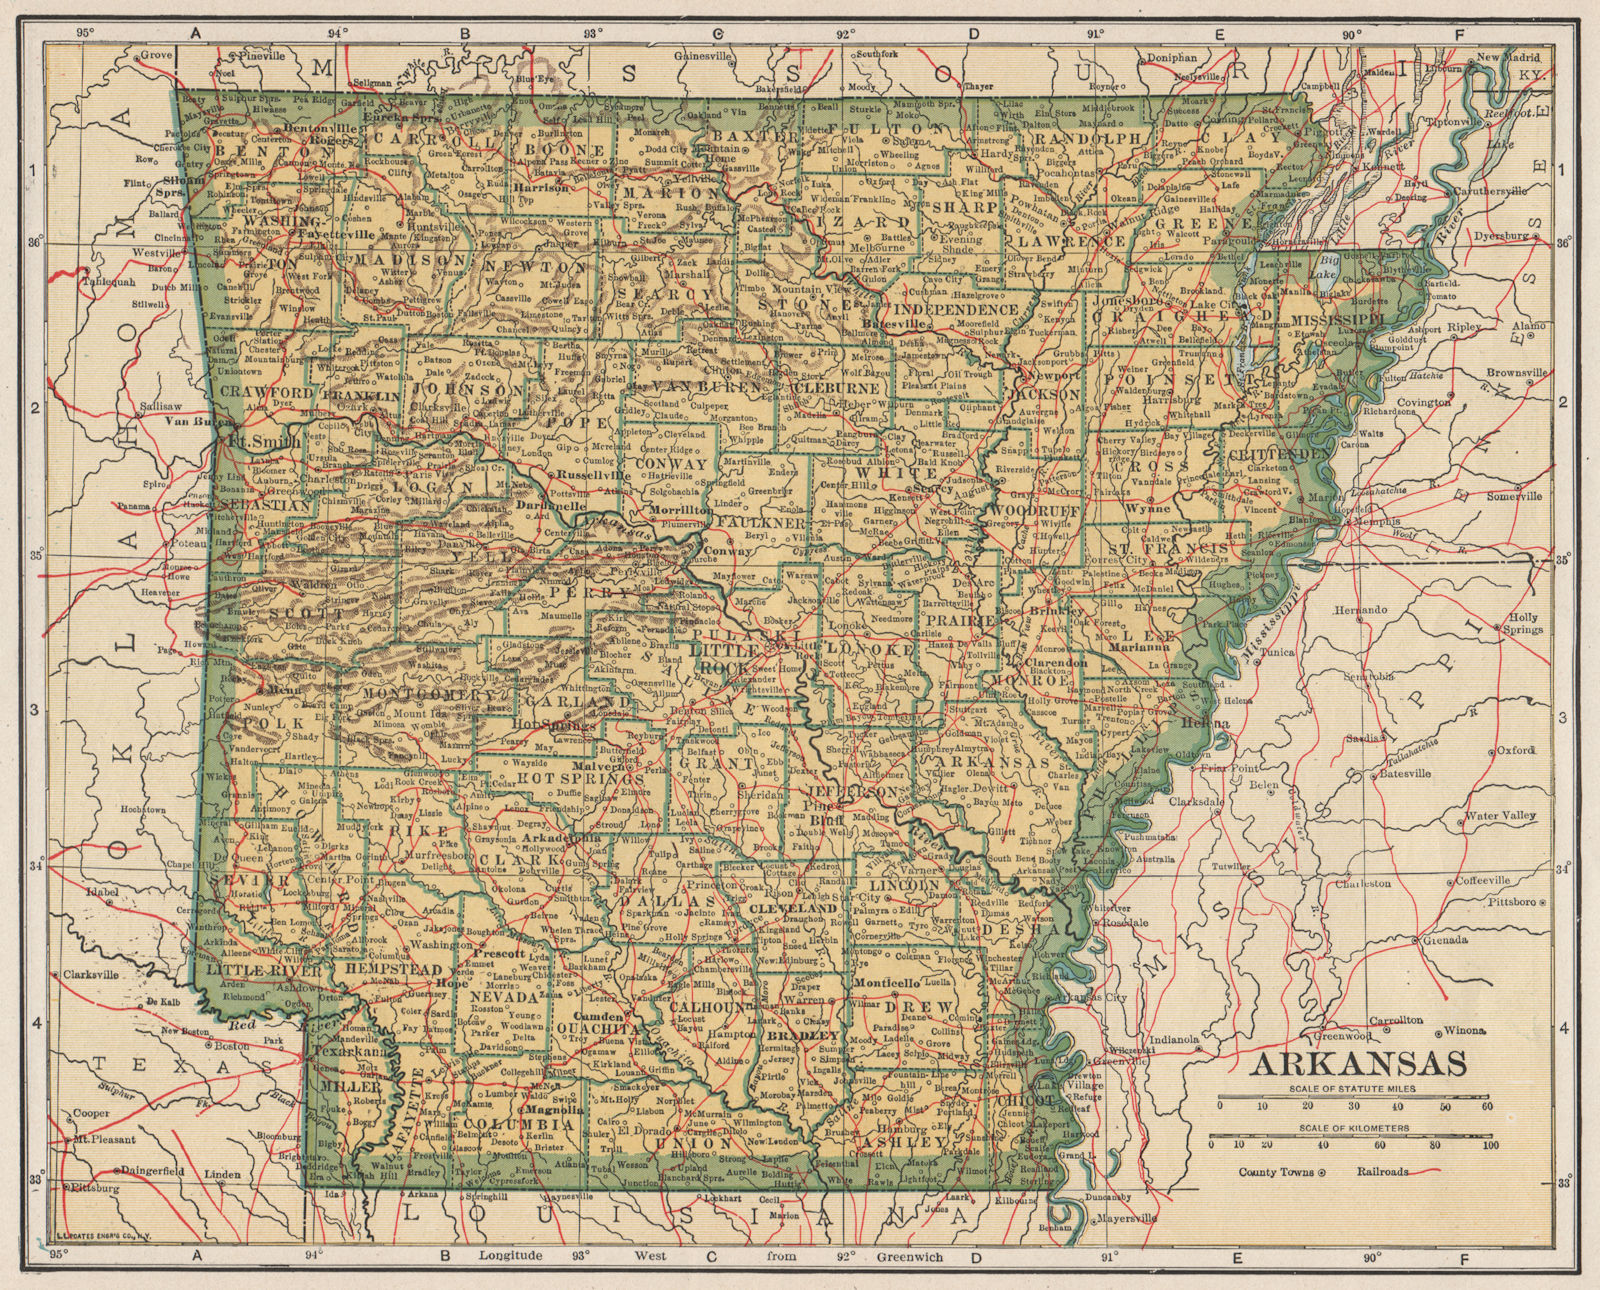 Associate Product Arkansas state map showing railroads. POATES 1925 old vintage plan chart